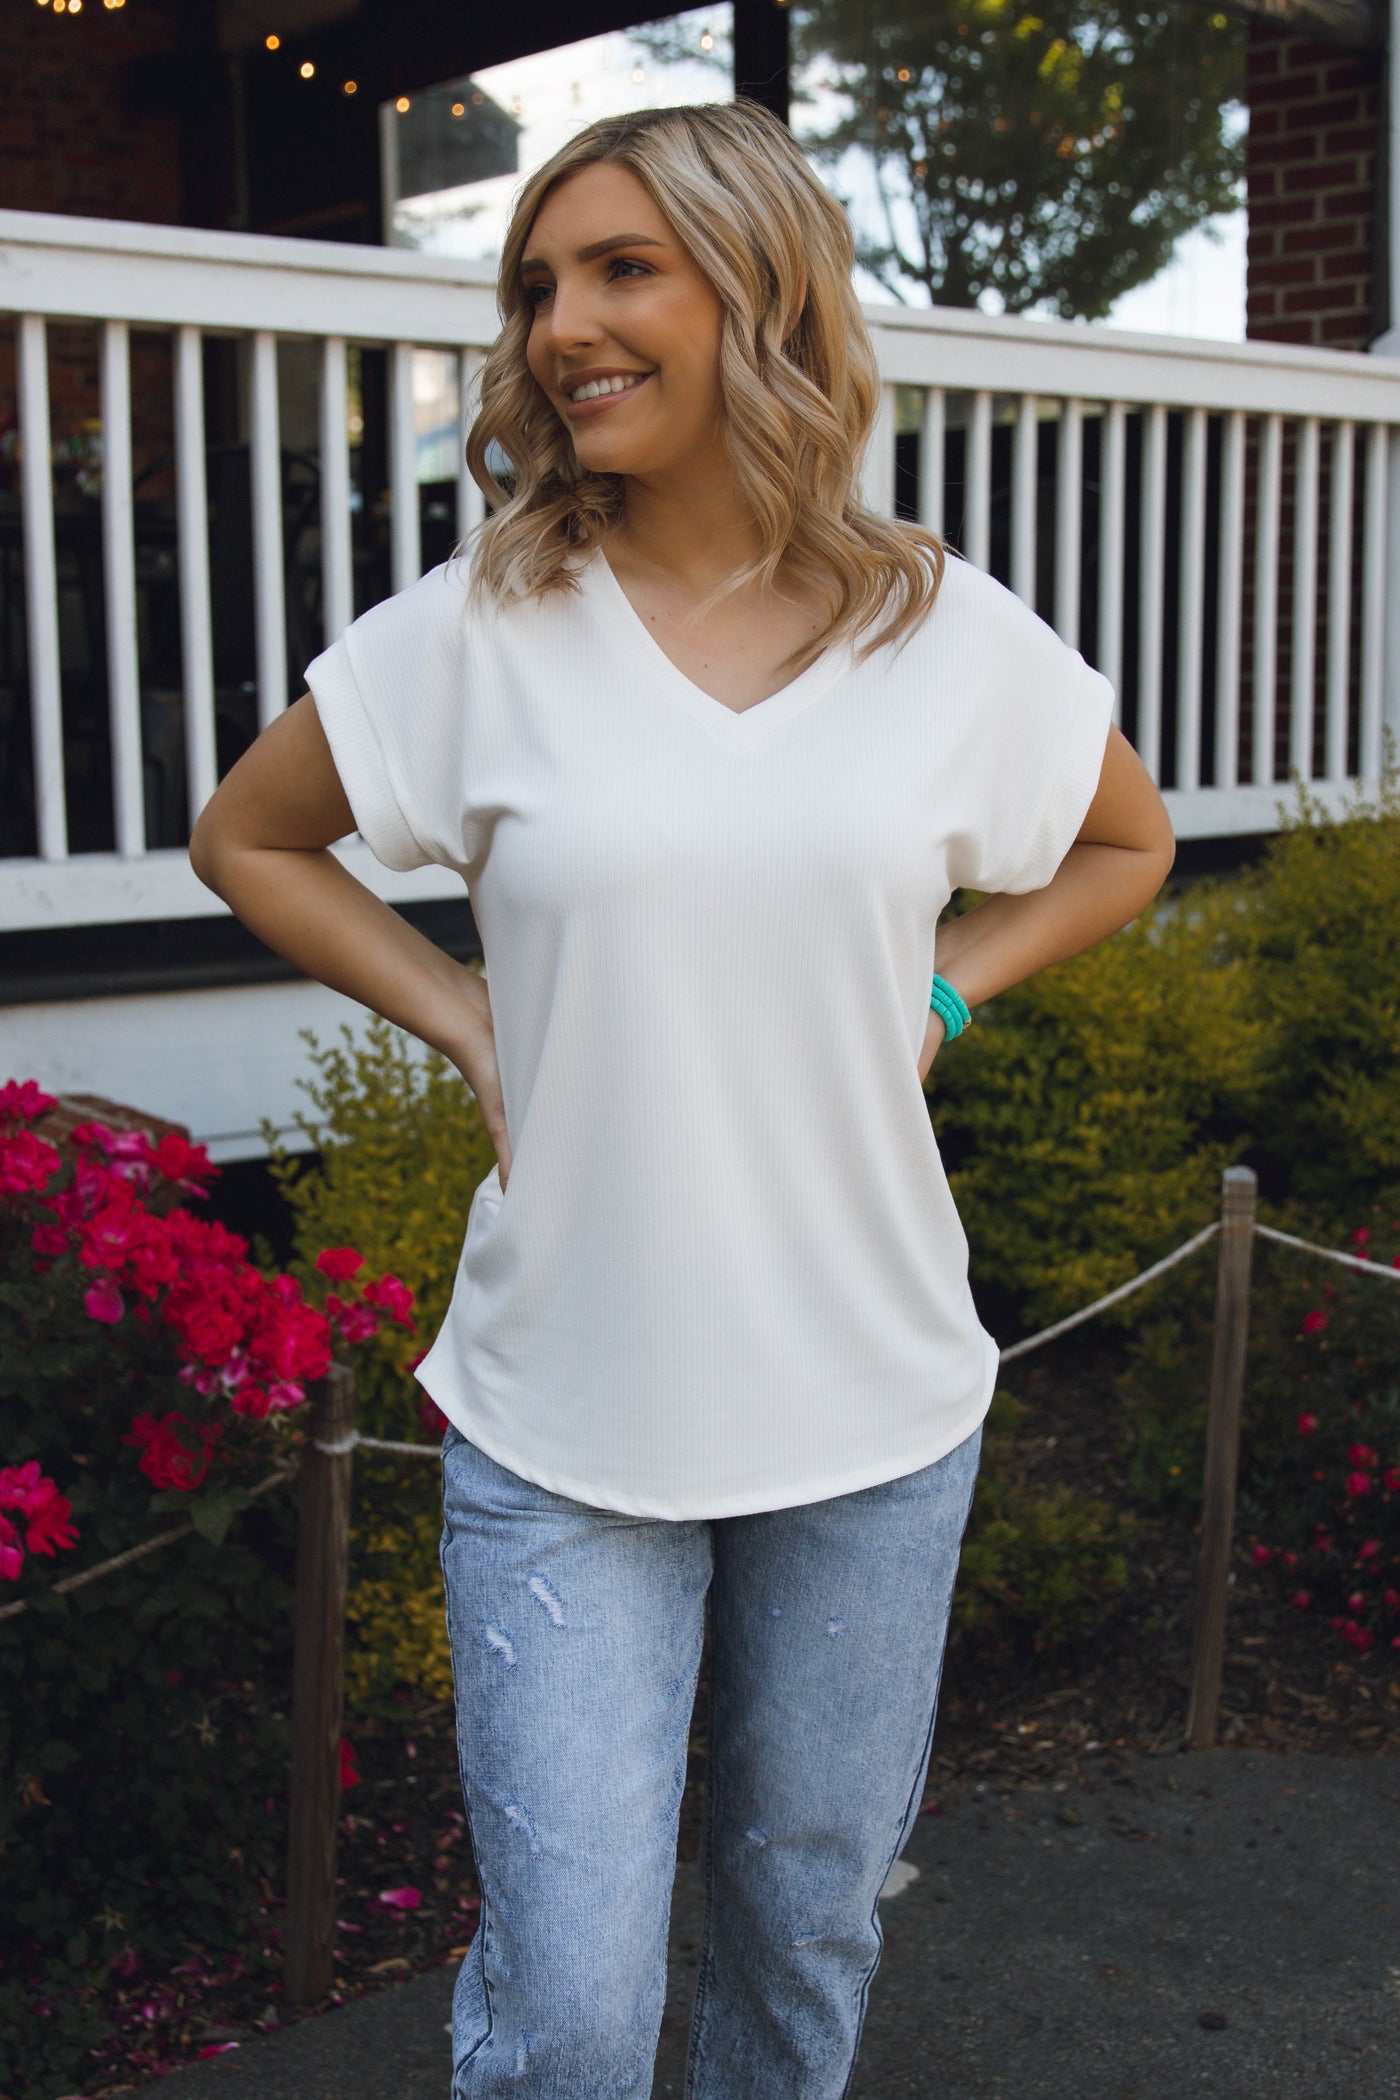 Women's Ribbed Top - Comfy Basic White Top - V-Neck Women's Top